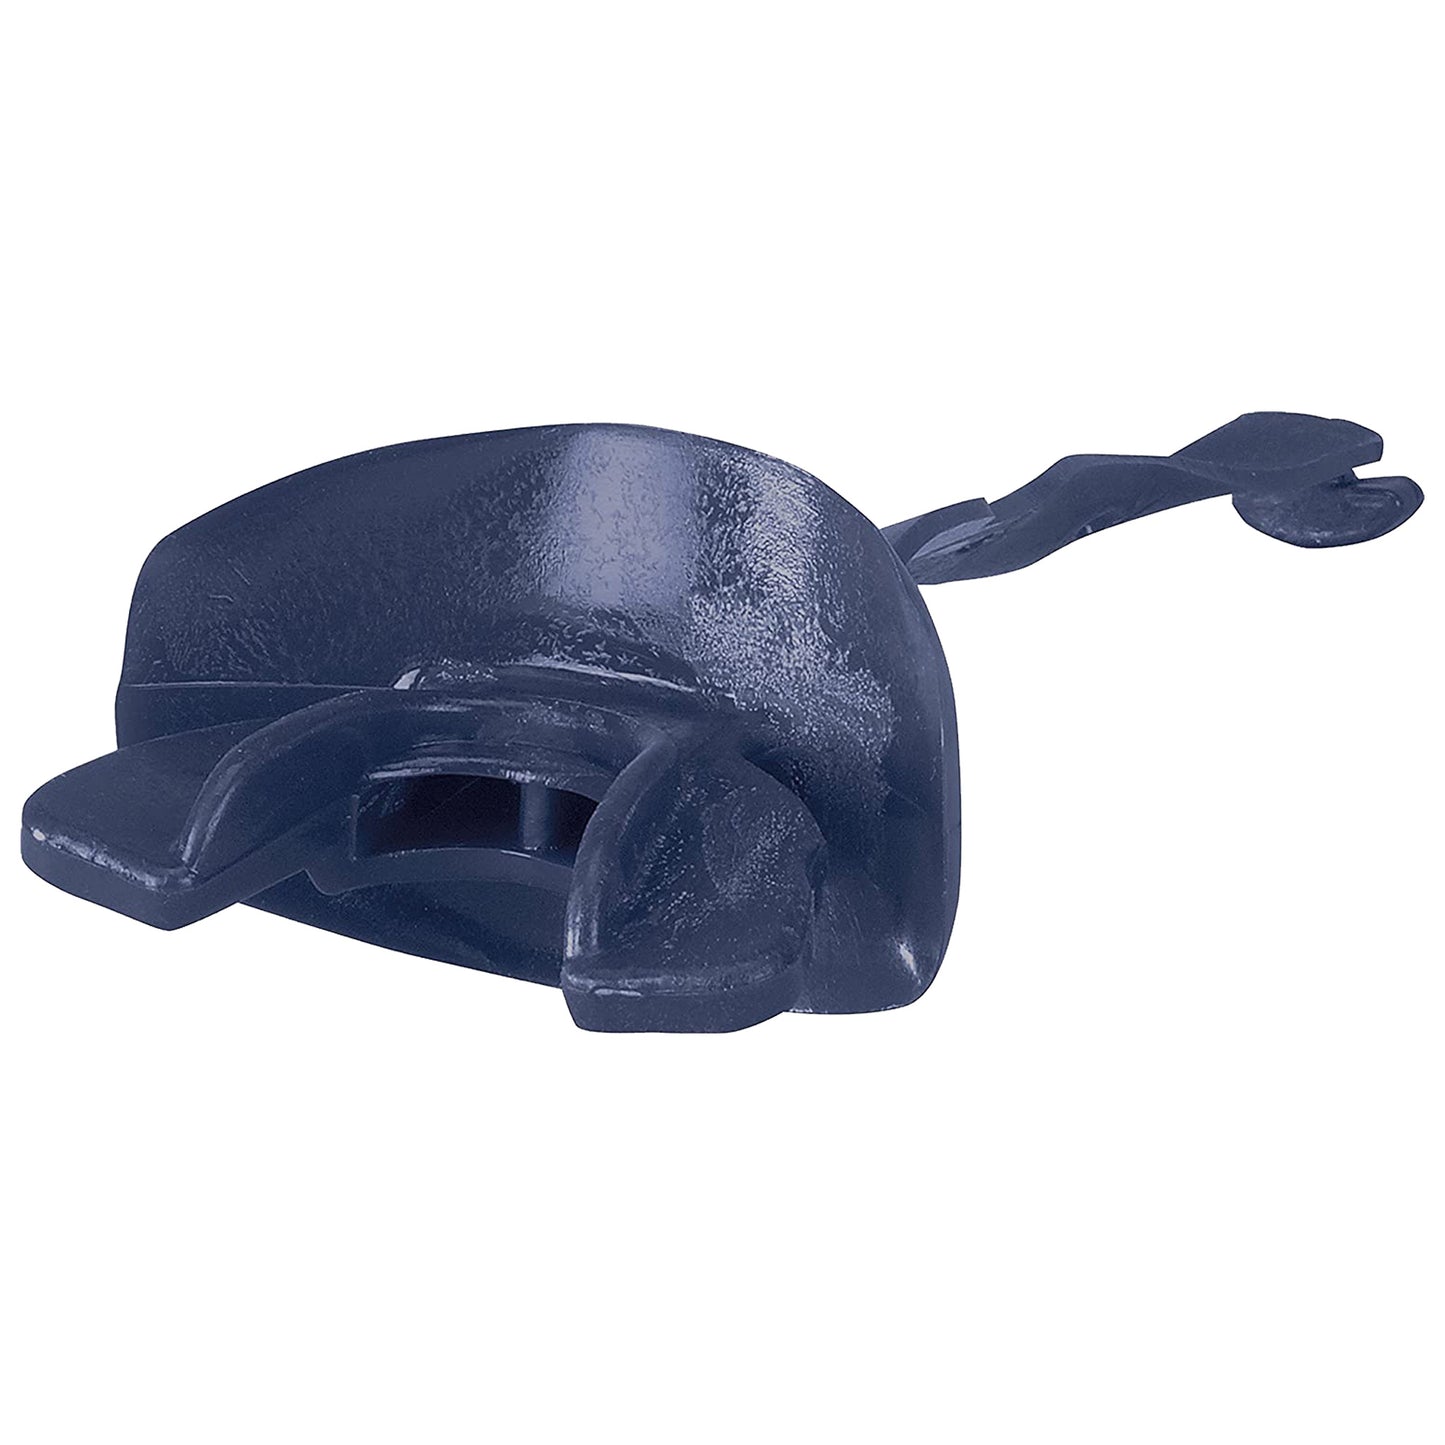 Vettex Doublegaurd Mouthguard with Lip Protector - Navy